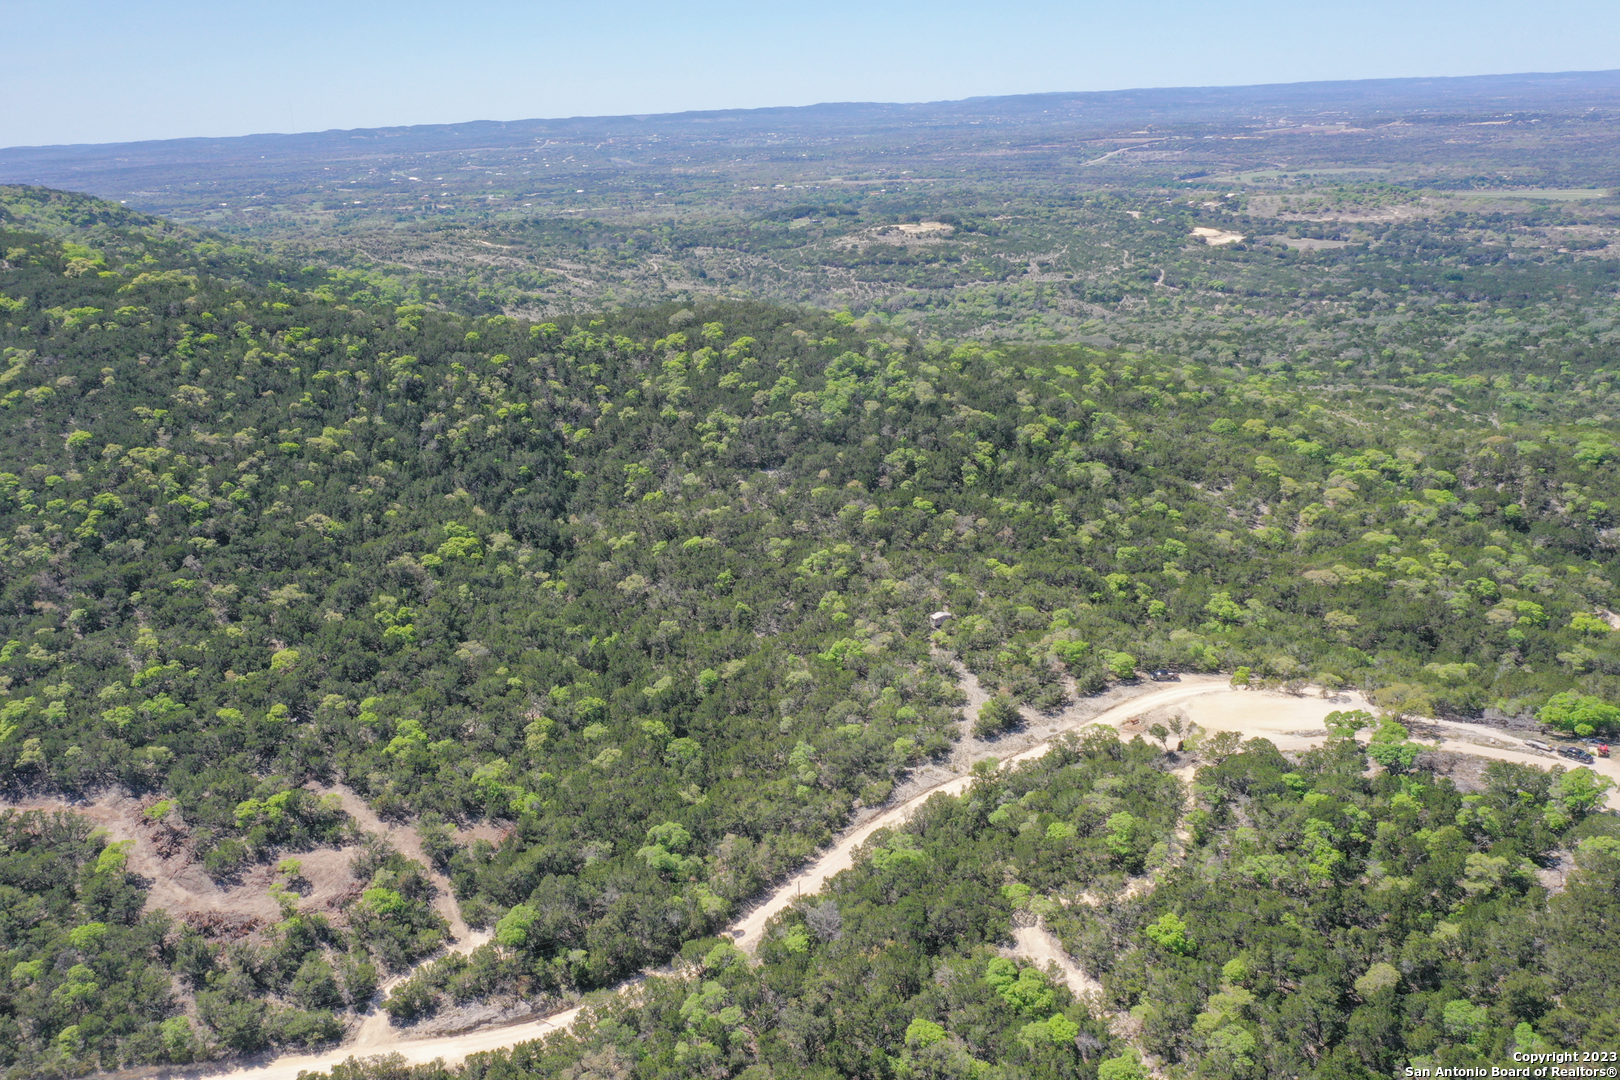 Photo of Tbd Spring Rd in Bandera, TX